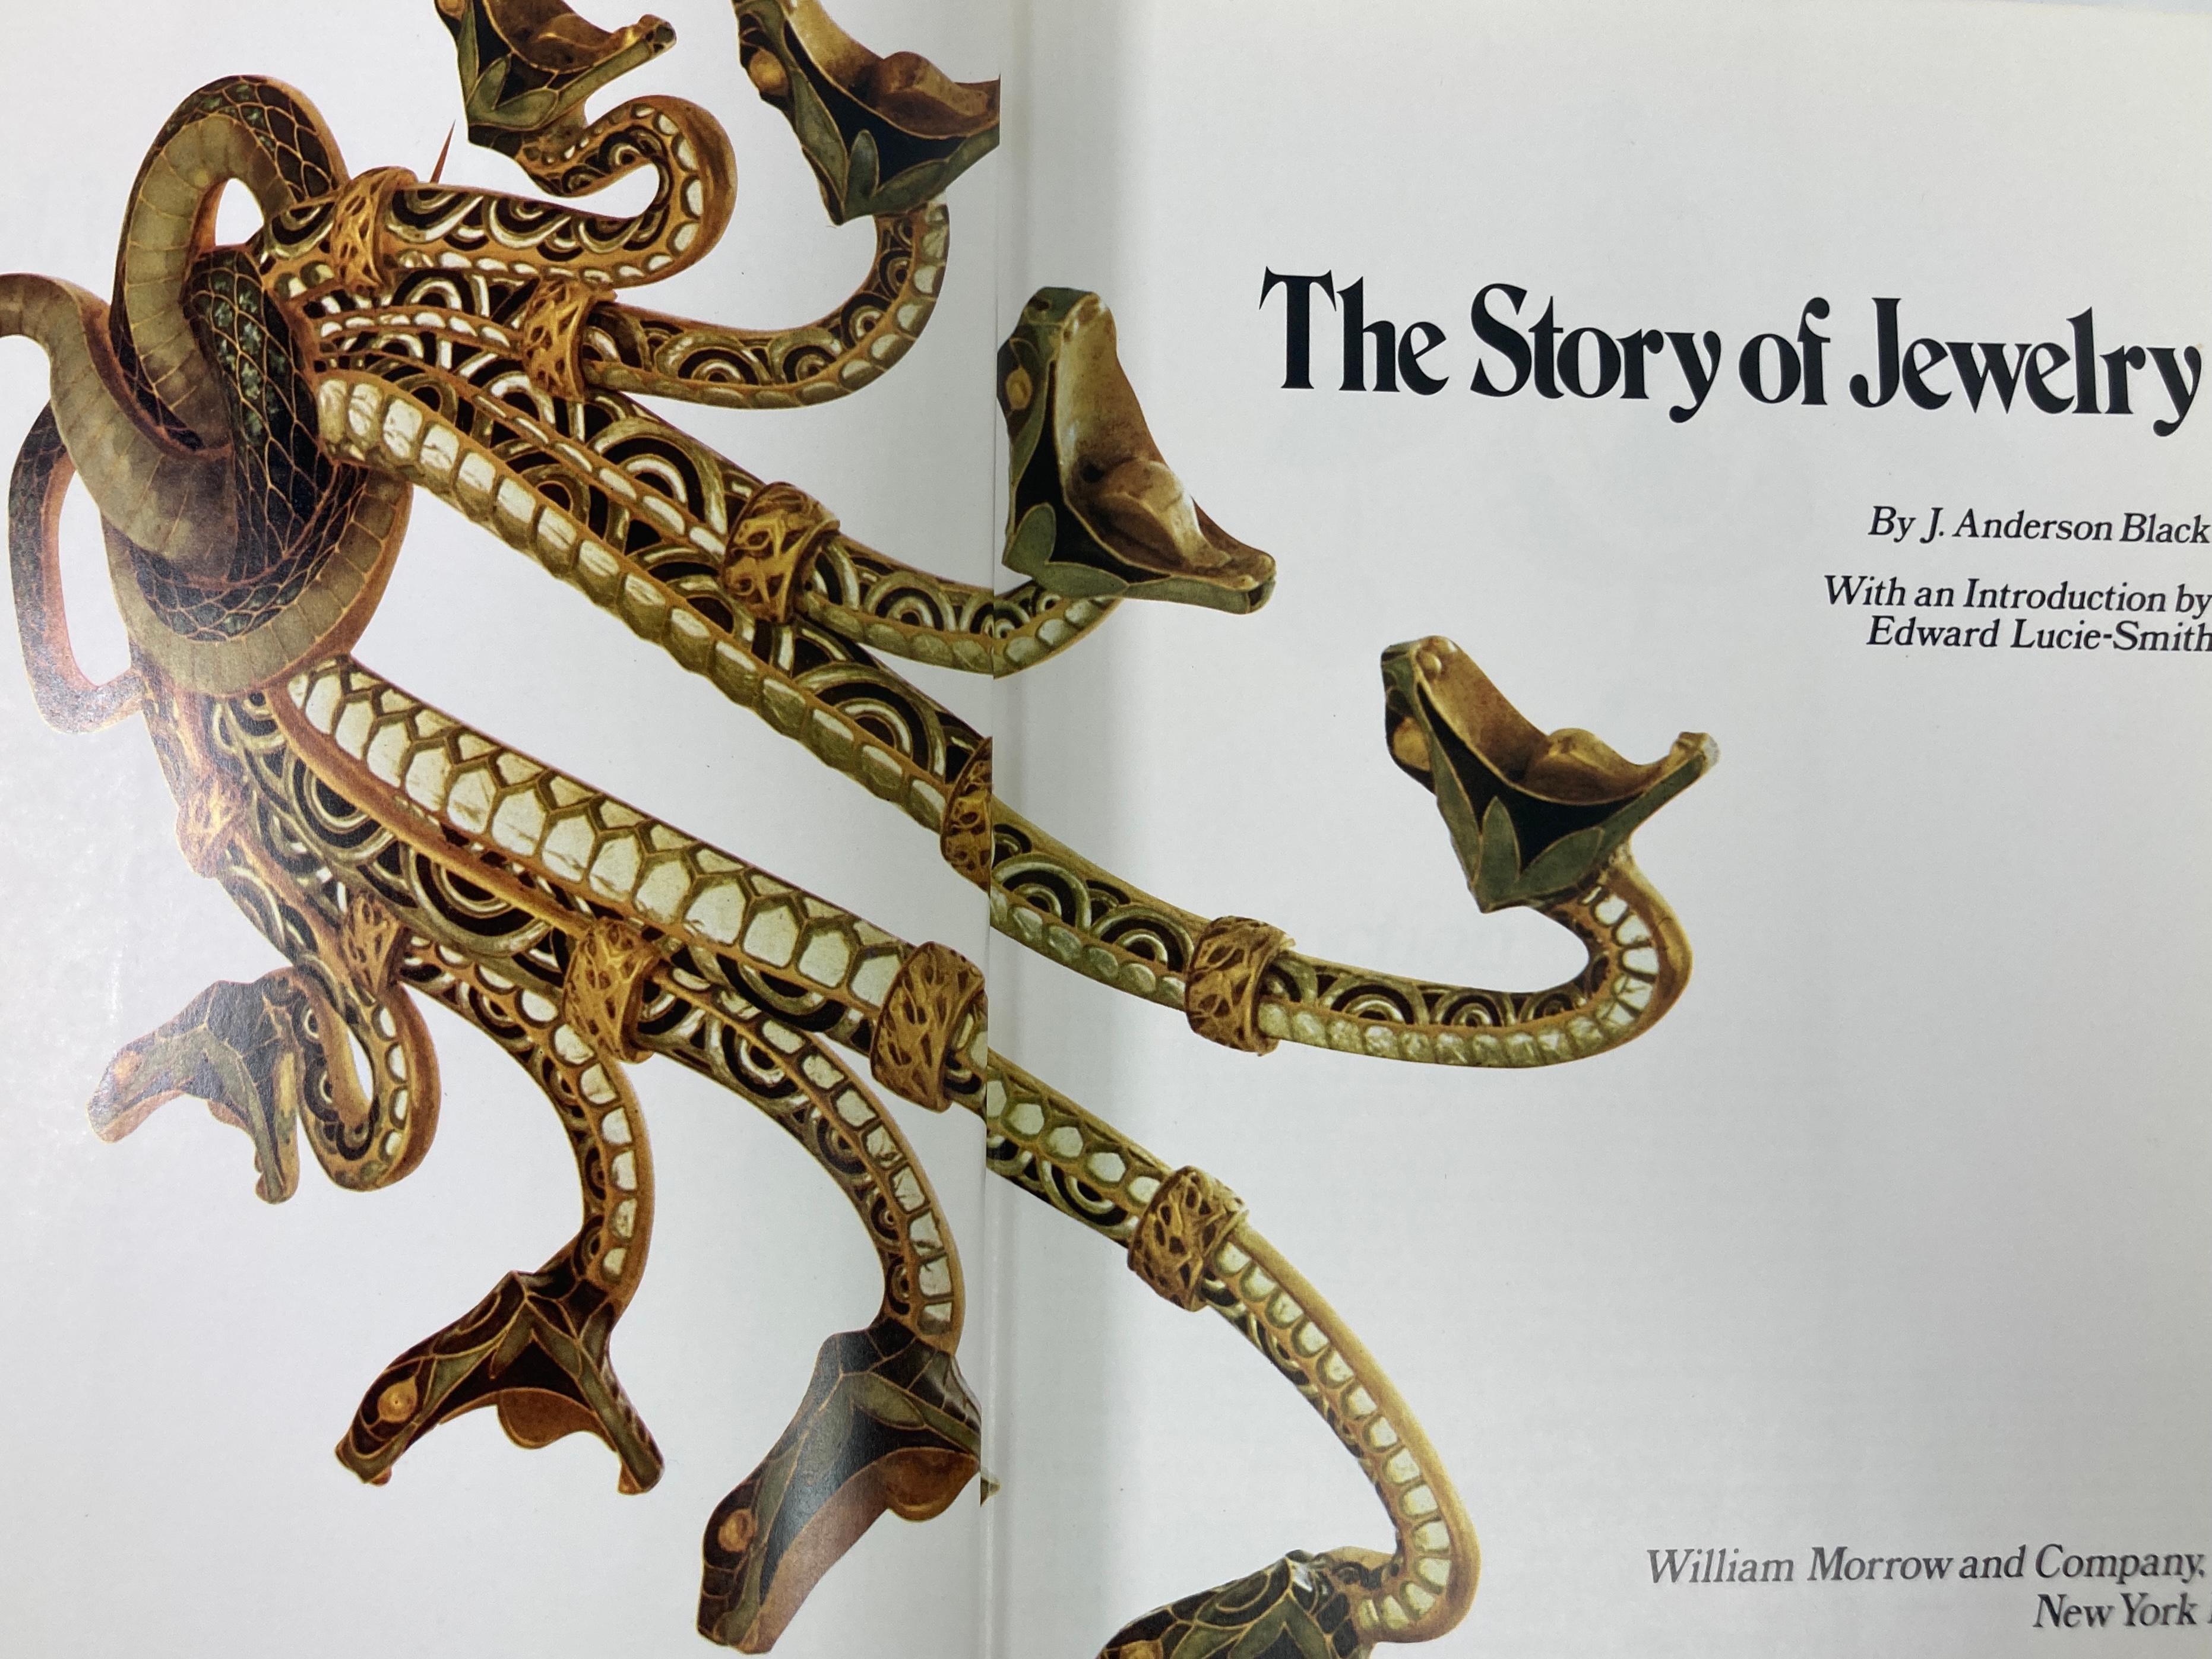 The Story of Jewelry 1st ED. 1973 von J. Anderson, Hardcoverbuch im Angebot 2